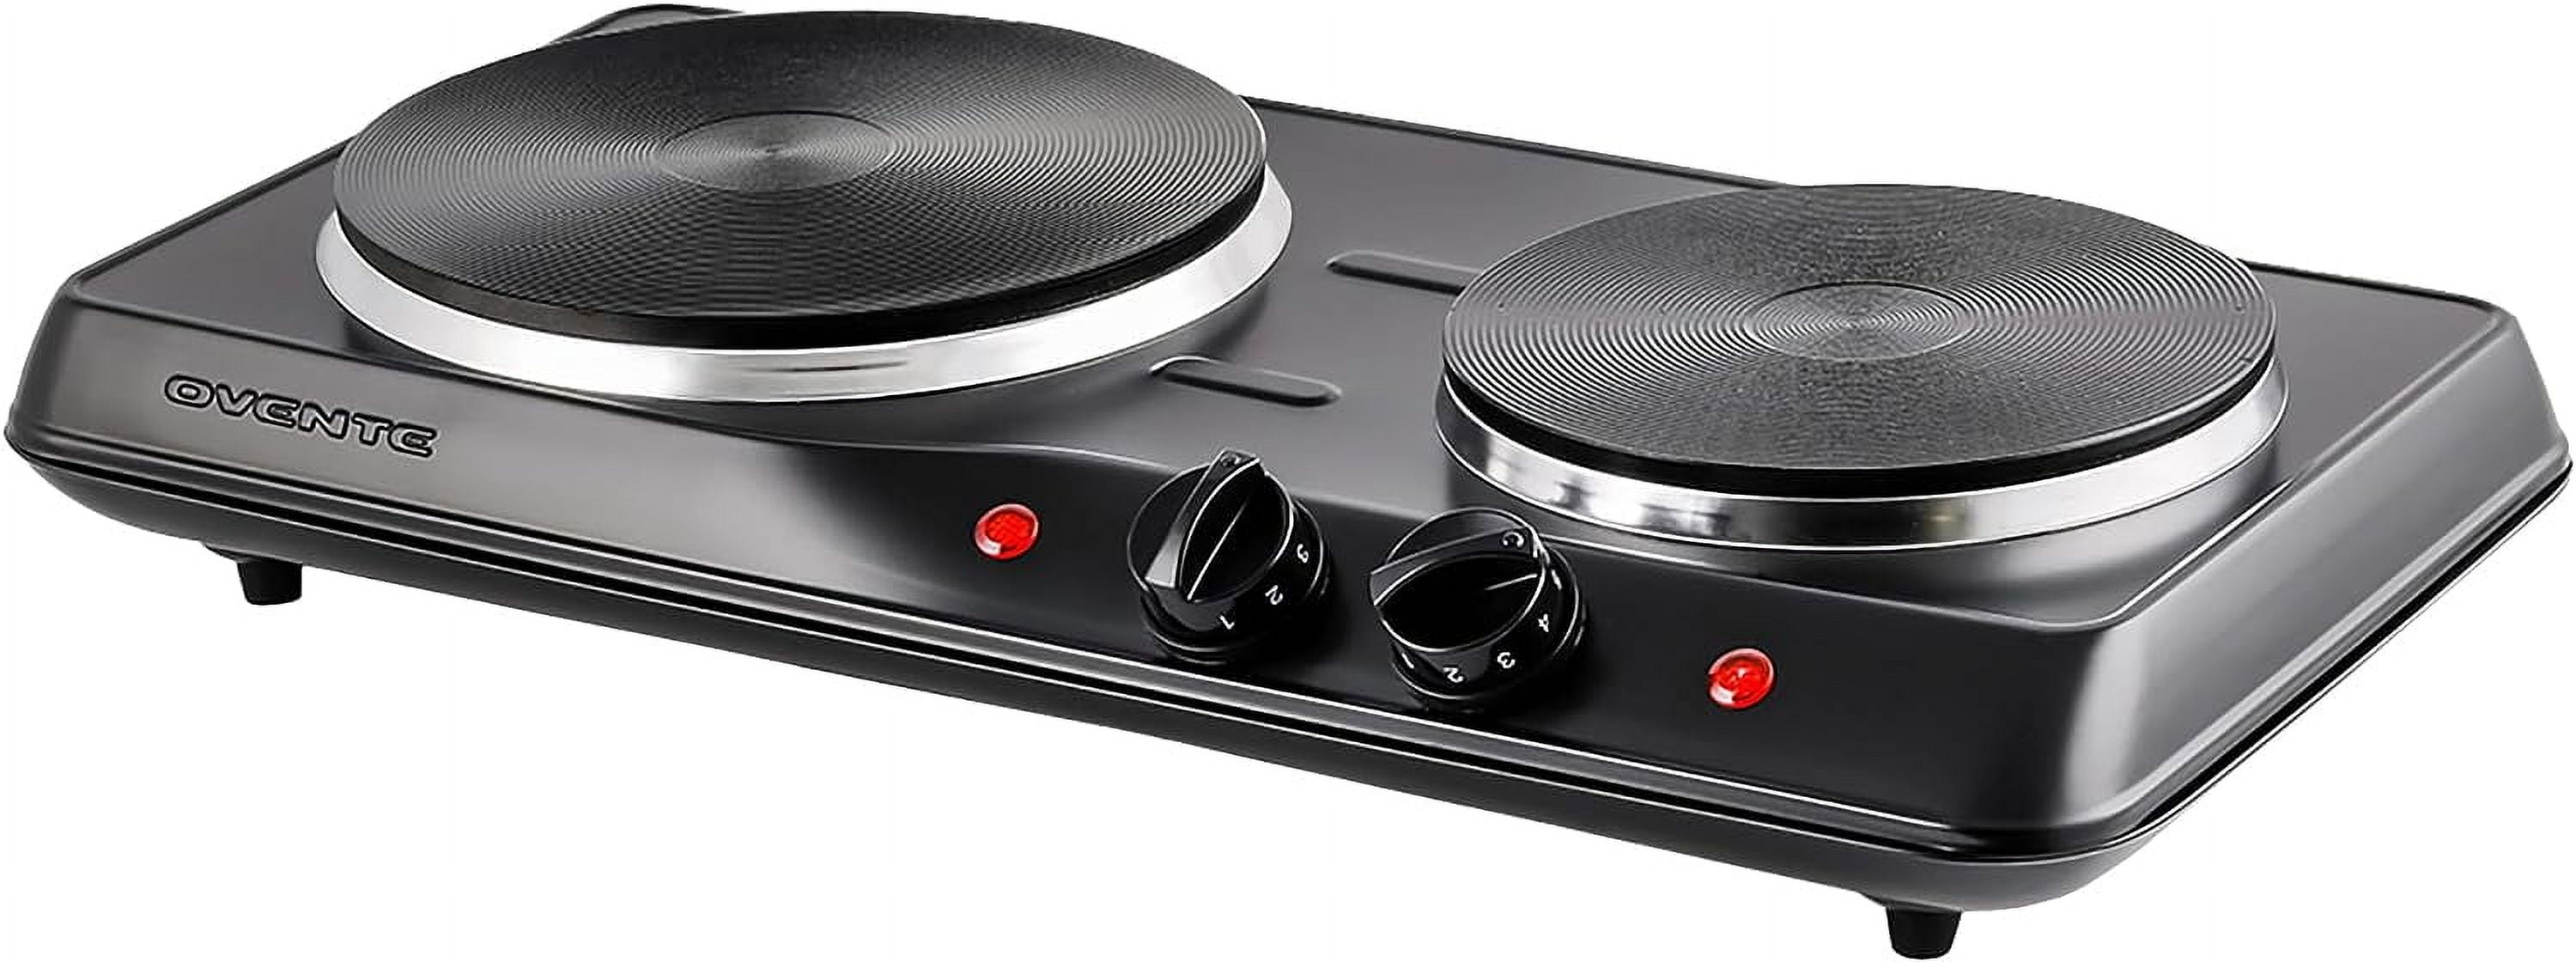 Hot Plate Double Burner Commercial Electric Portable Countertop Stove  Cooktop